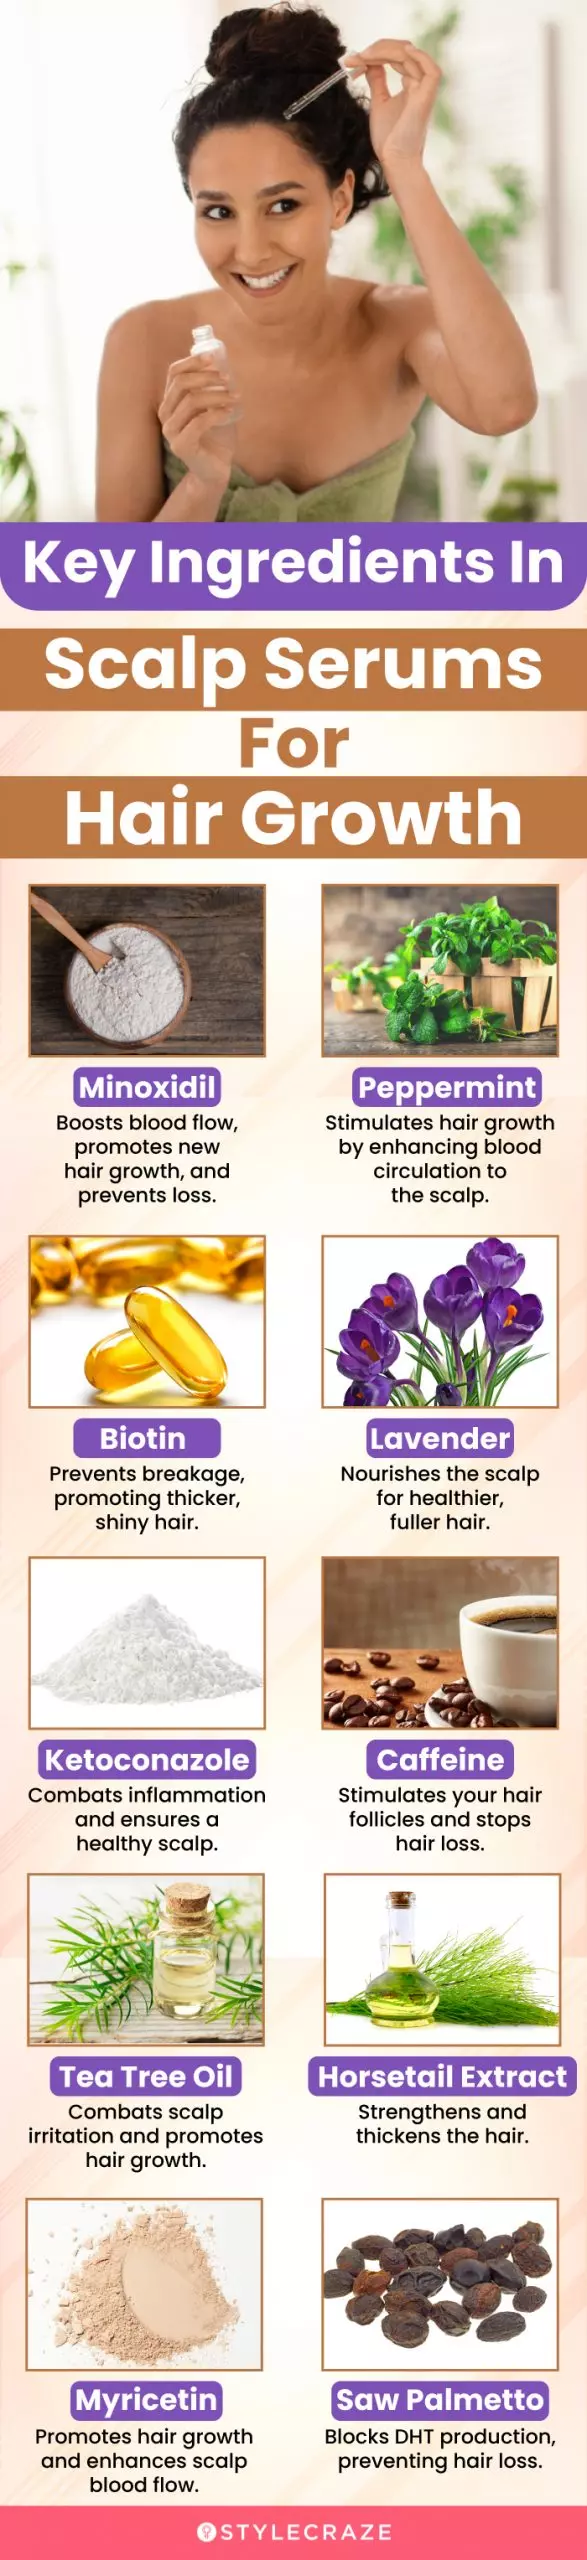 Key Ingredients In Scalp Serums For Hair Growth (infographic)